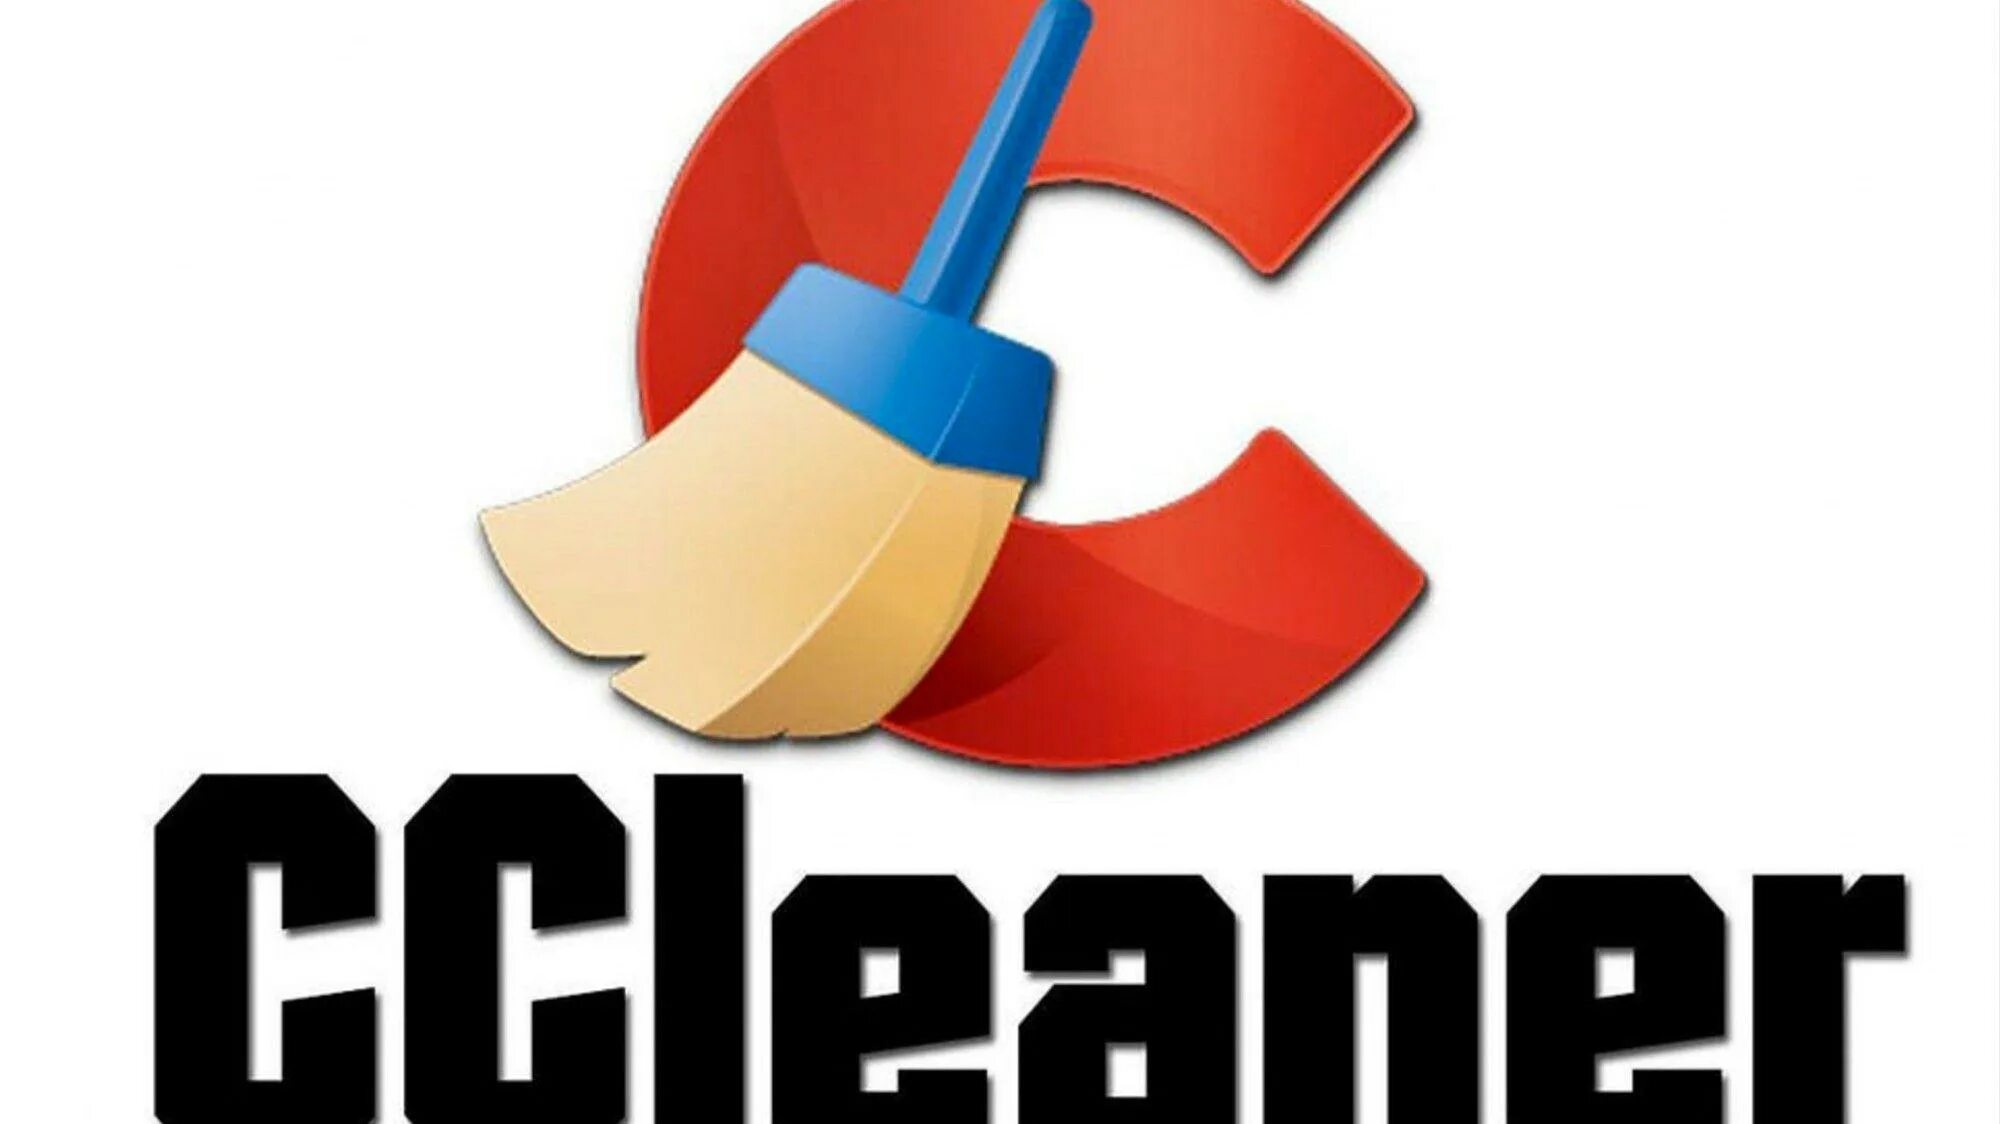 Os cleaner. CCLEANER. CCLEANER картинки. CCLEANER лого. CCLEANER Pro.